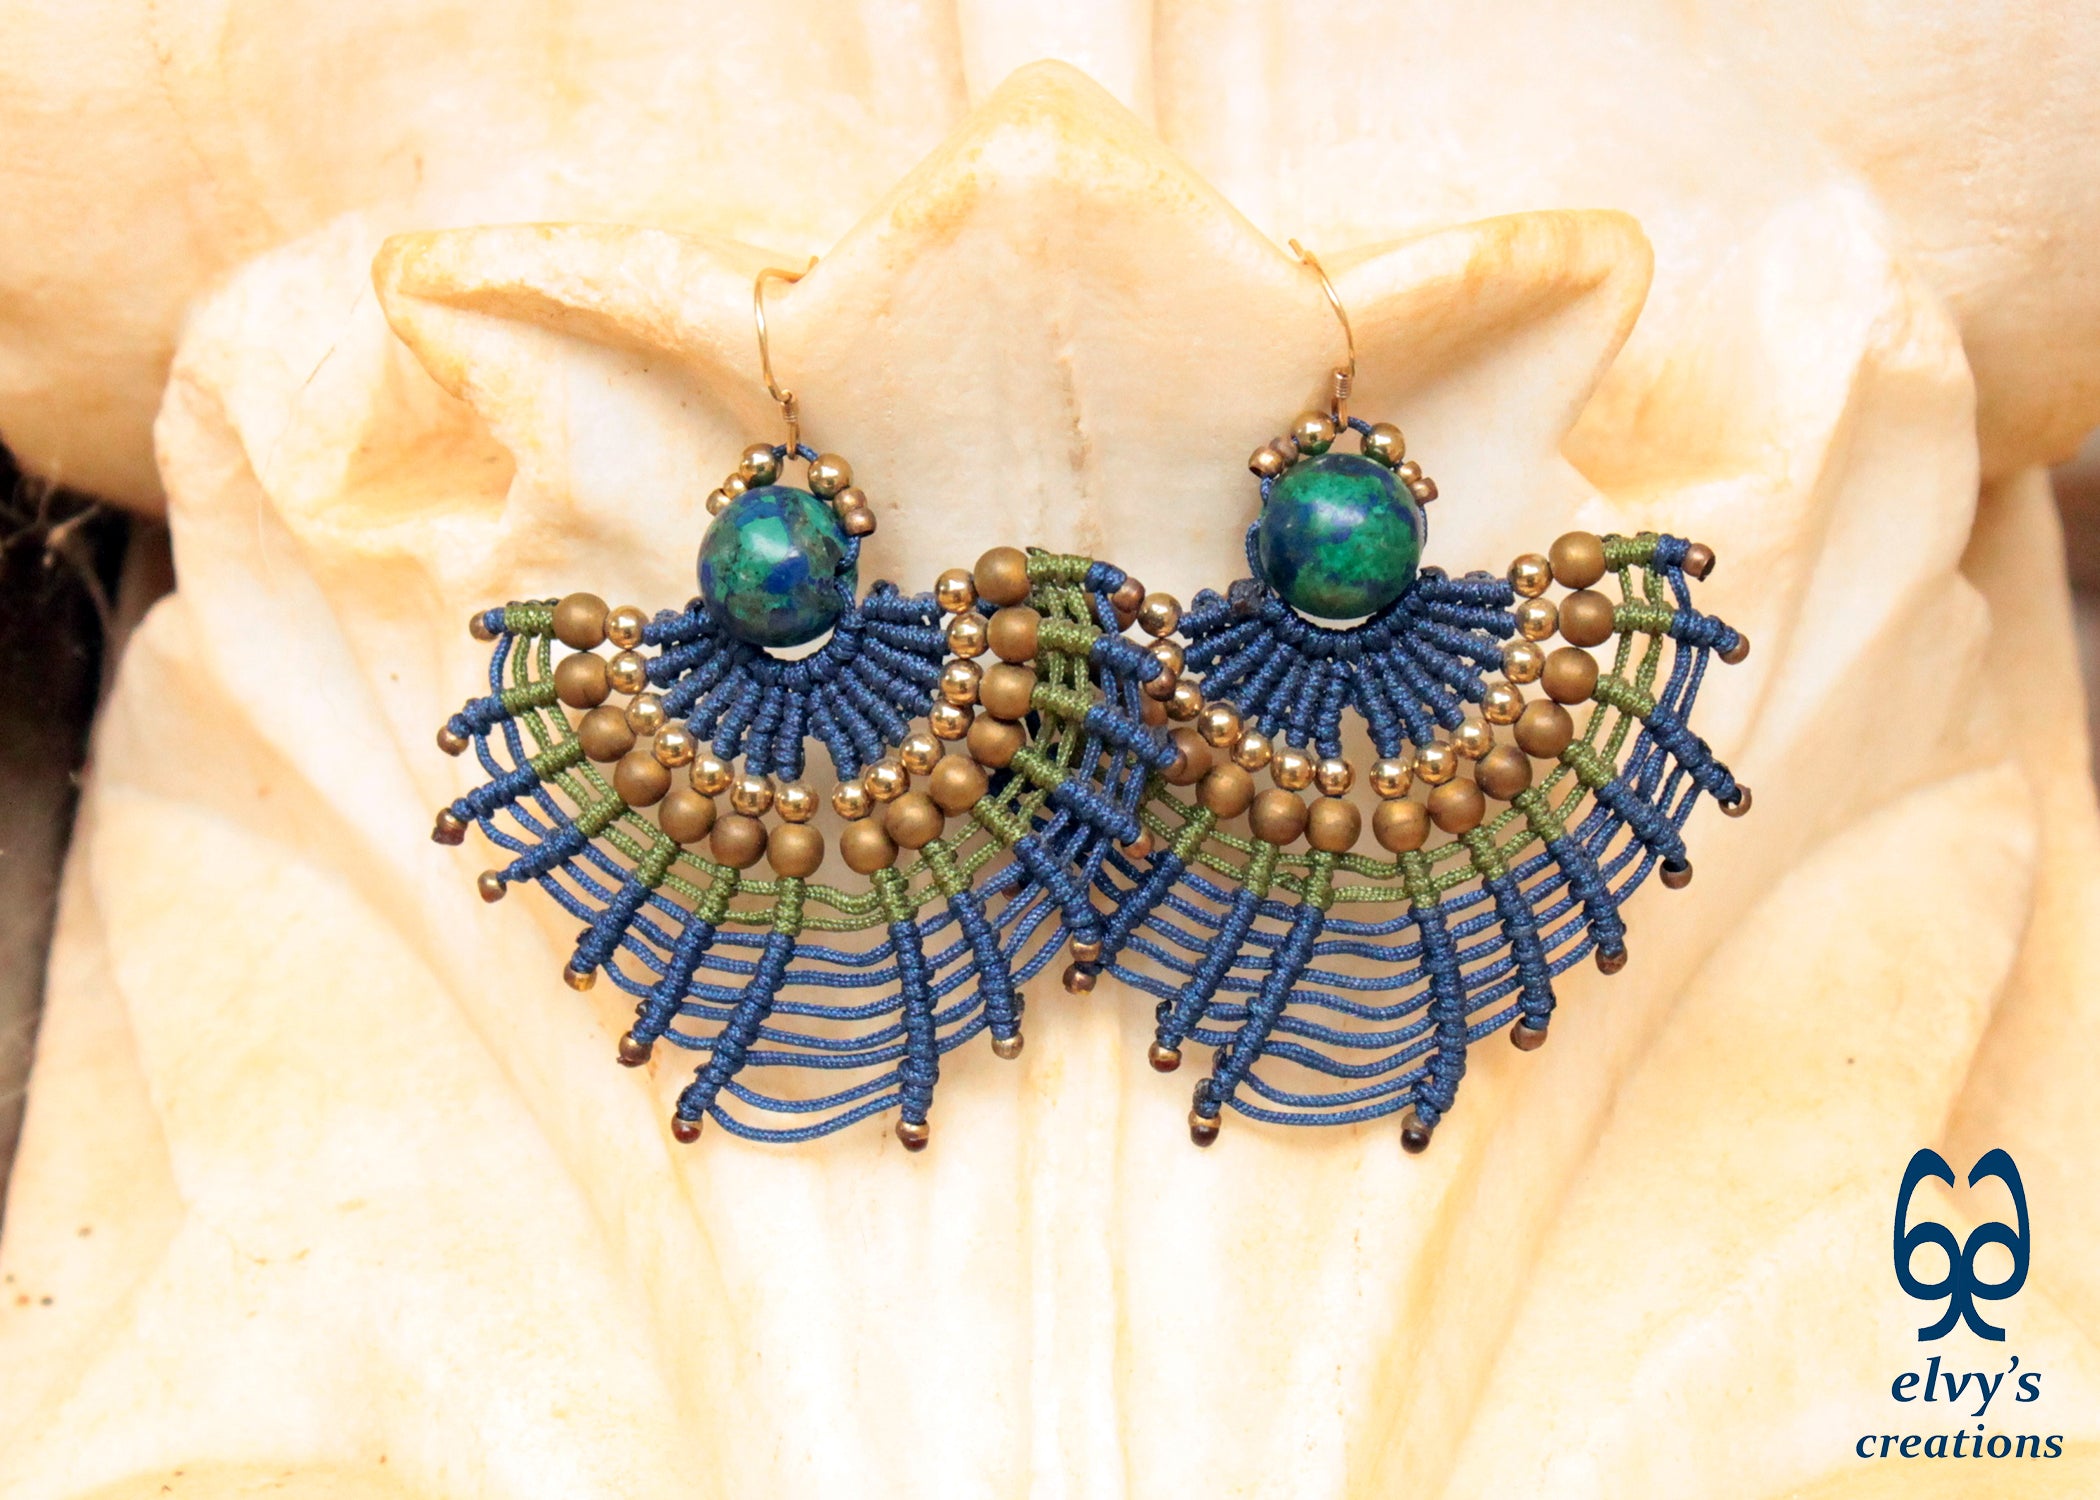 4 Color Vintage Women's Dripping Oil Peacock Earrings Hangers Bollywood  Bohemia Gold Sector Alloy Beads Wedding Earrings